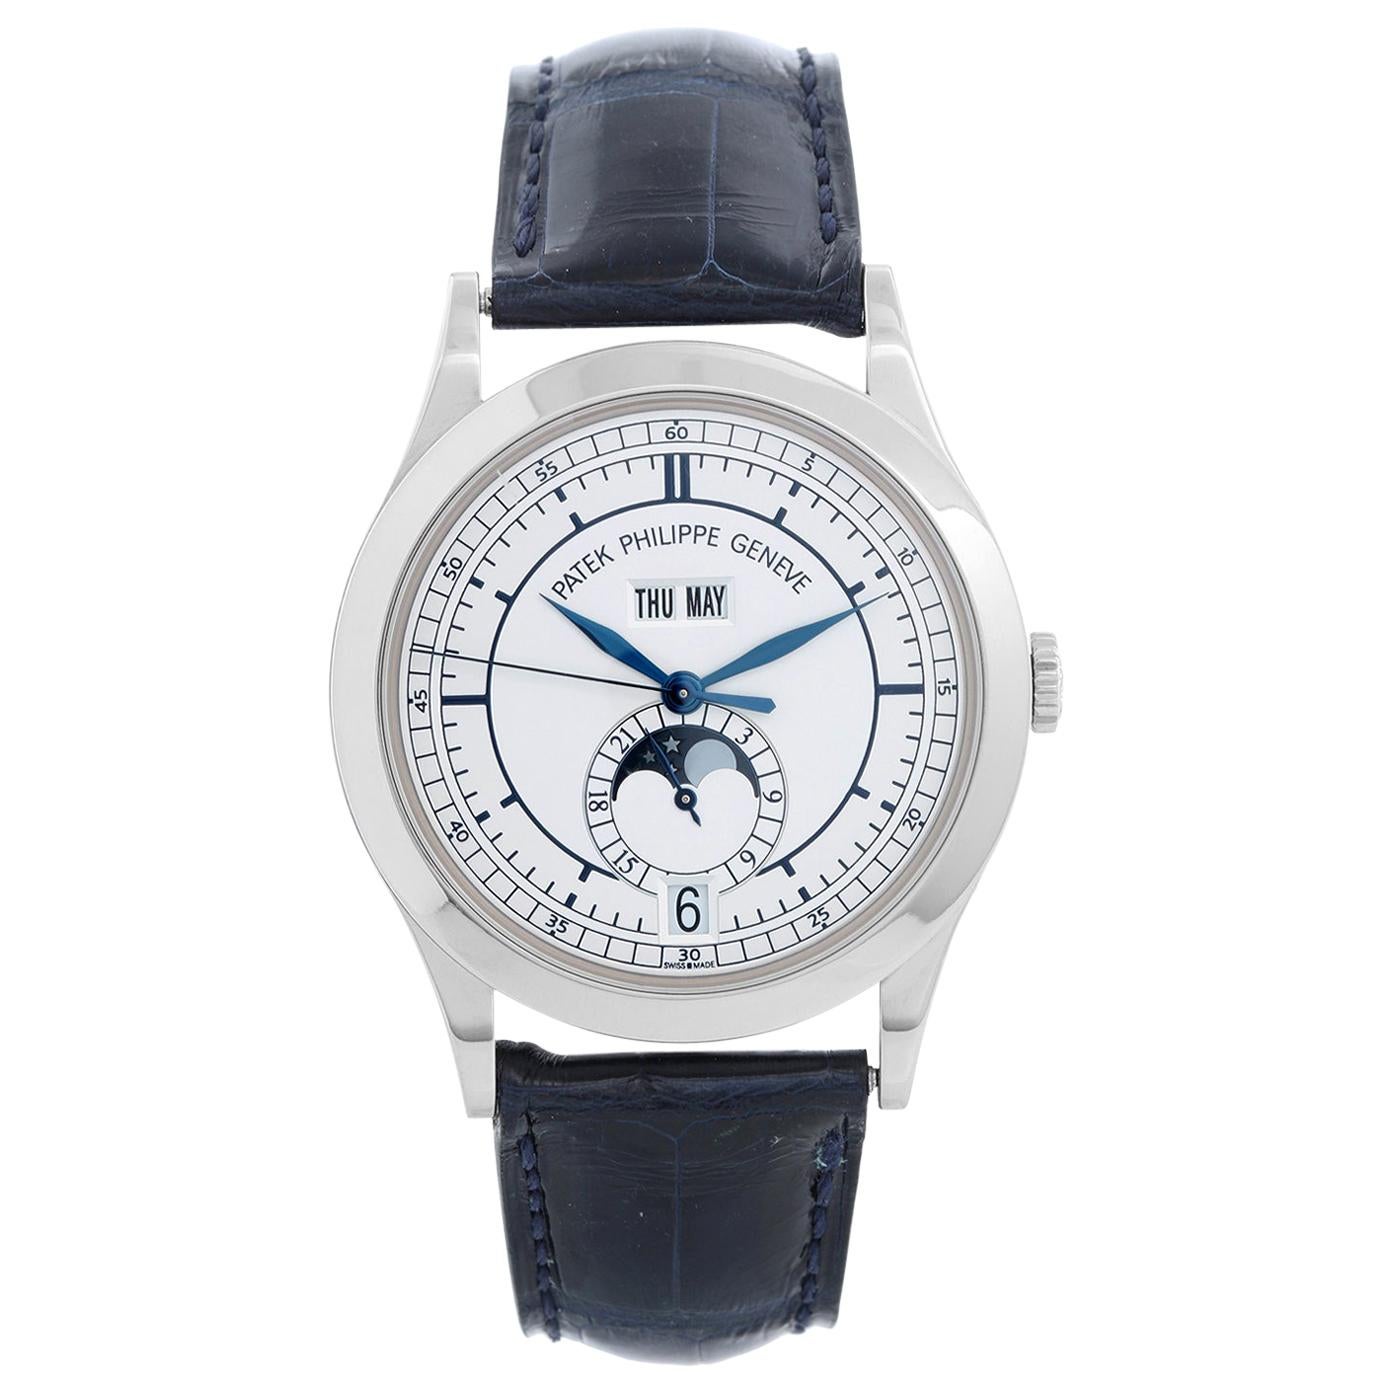 Patek Philippe Annual Calendar with Moon Phase 5396 G 'or 5396G-001'